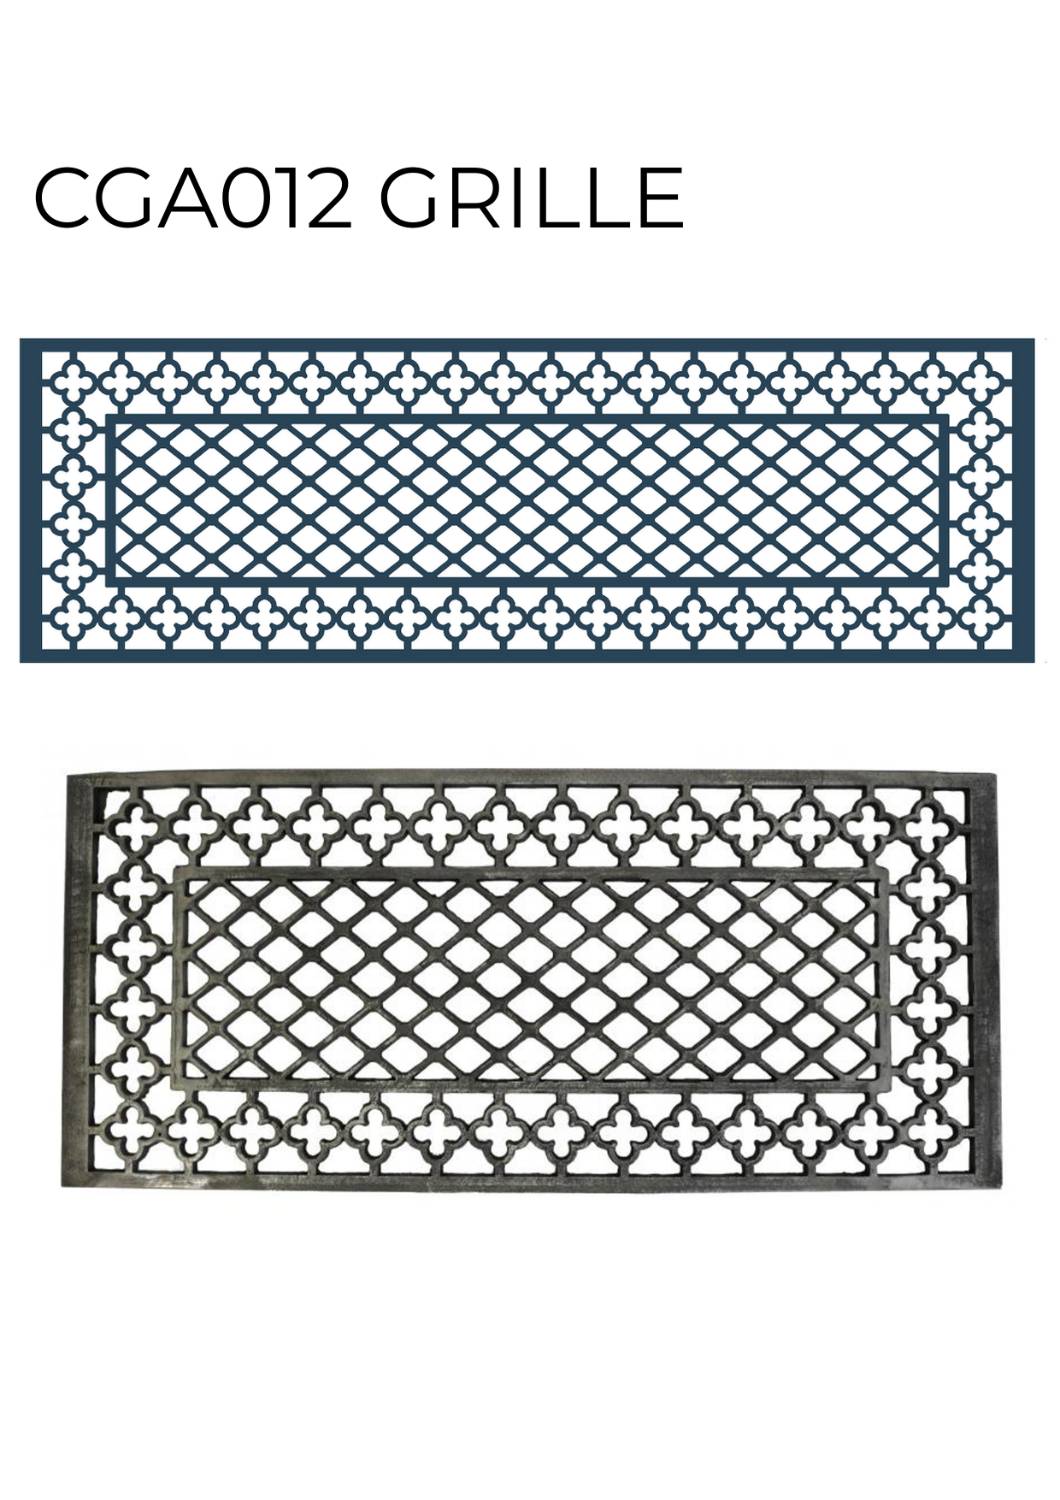 Cast iron and aluminium ventilation grilles and gratings. Decorative floor and wall heating vent. CGA012 Grille 